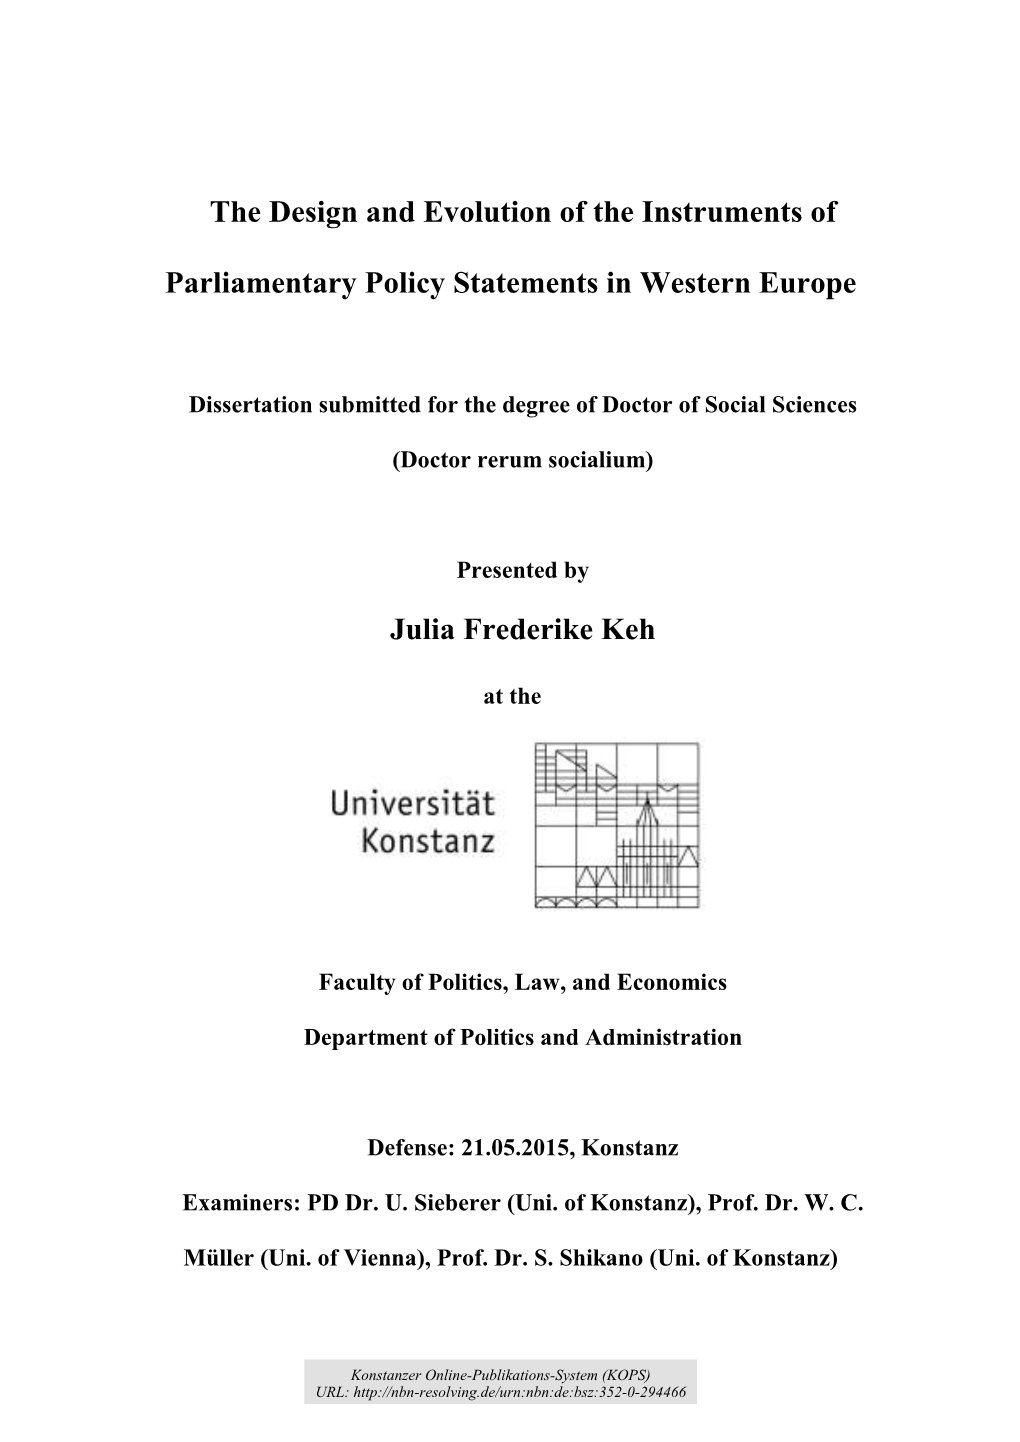 The Design and Evolution of the Instruments of Parliamentary Policy